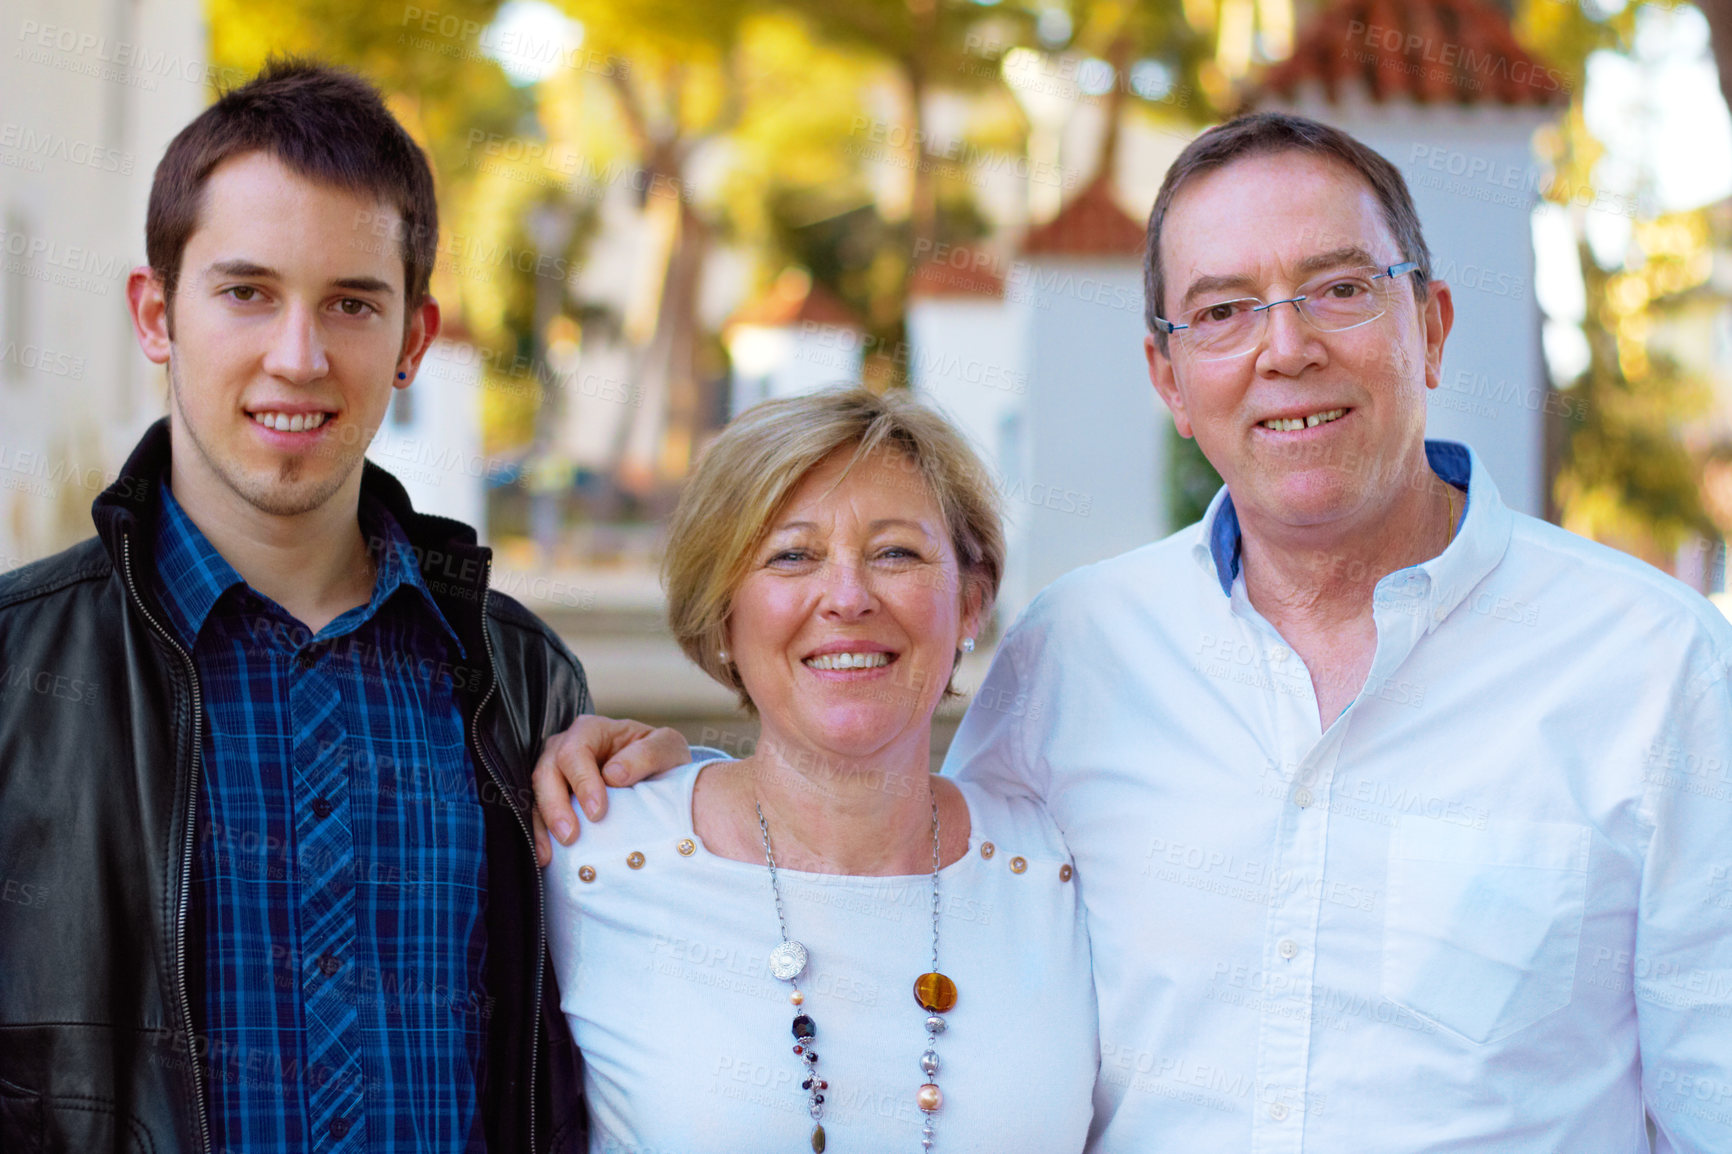 Buy stock photo Portrait of a couple and their son standing outdoors